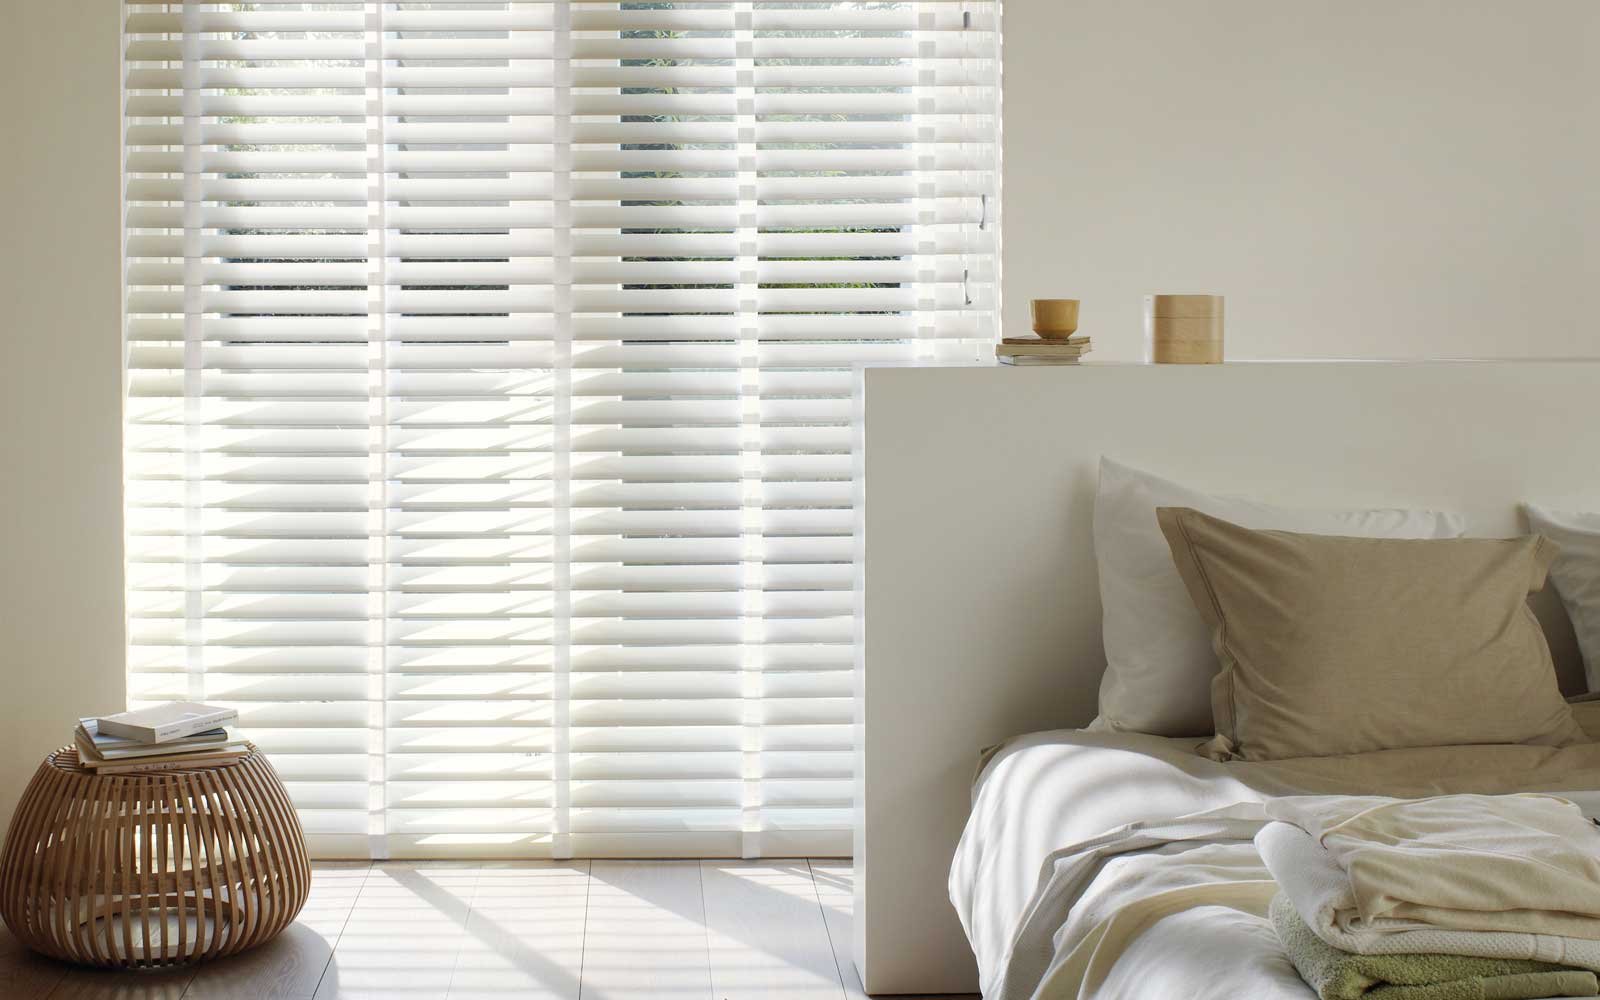 Roman blinds eye catching window decorations and privacy screens